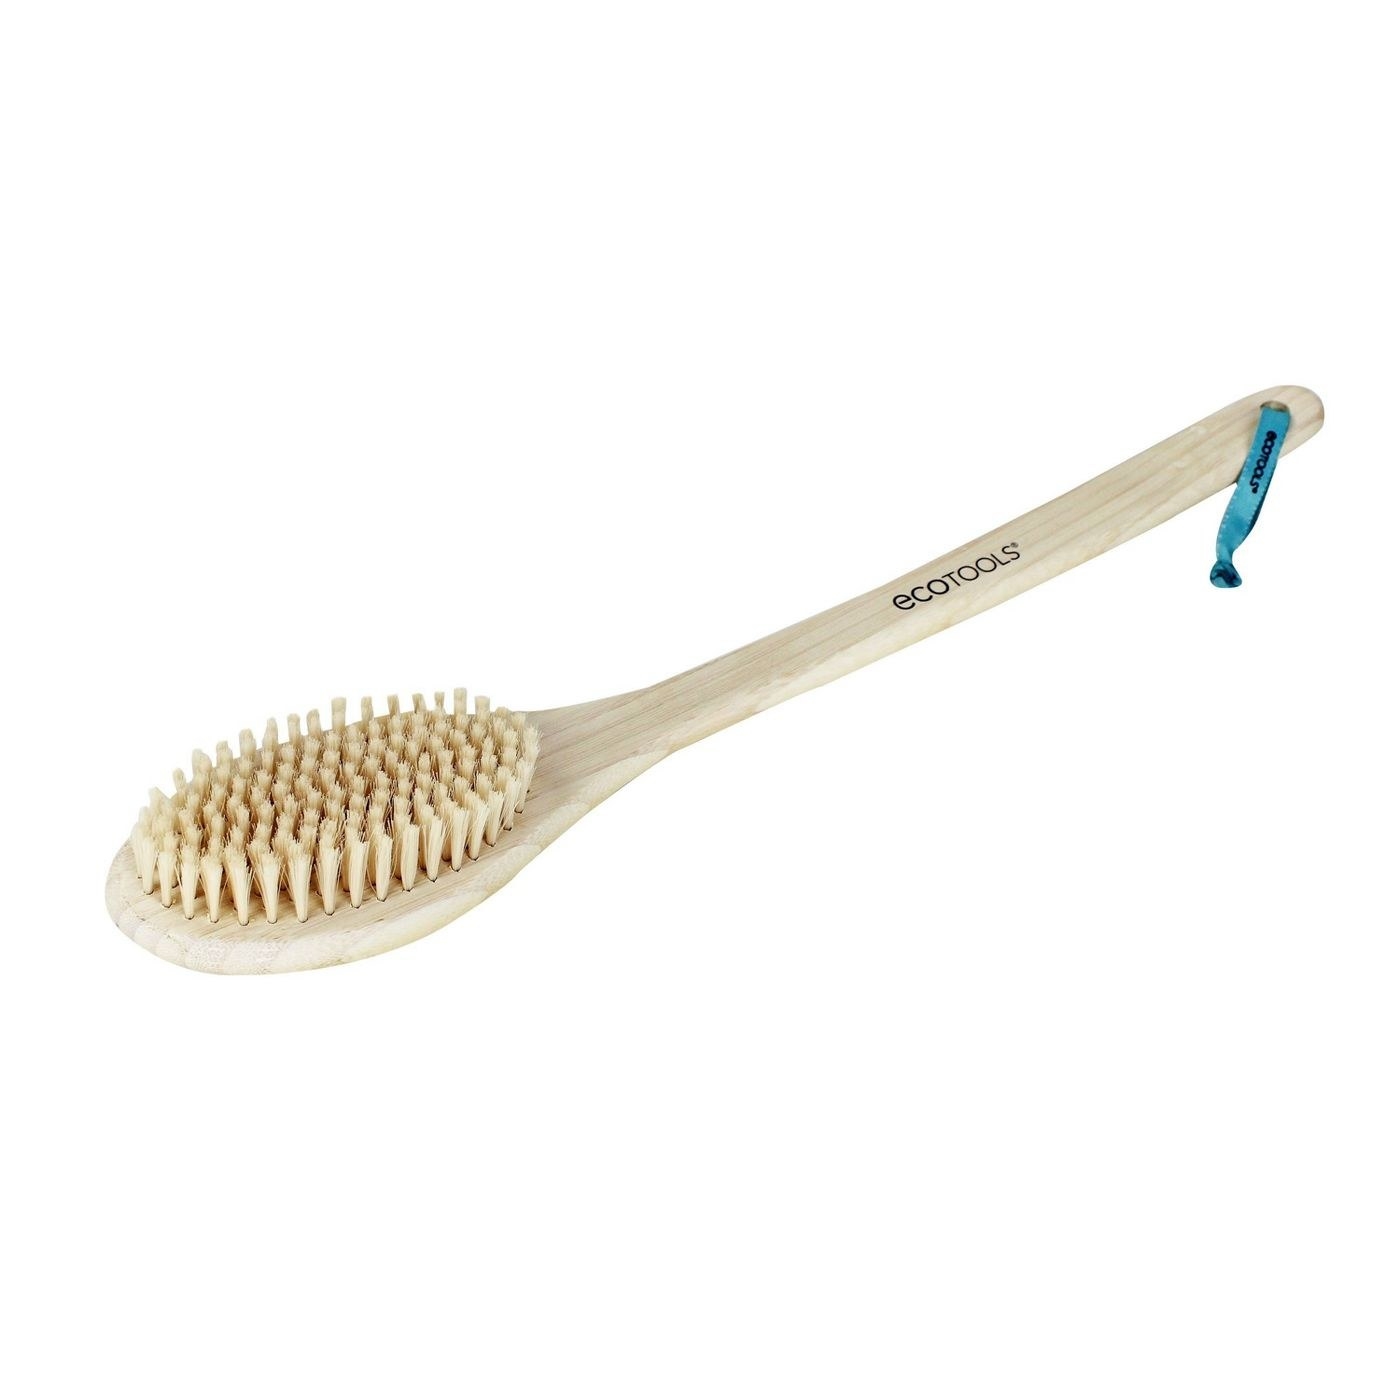 The bamboo shower brush with tan bristles